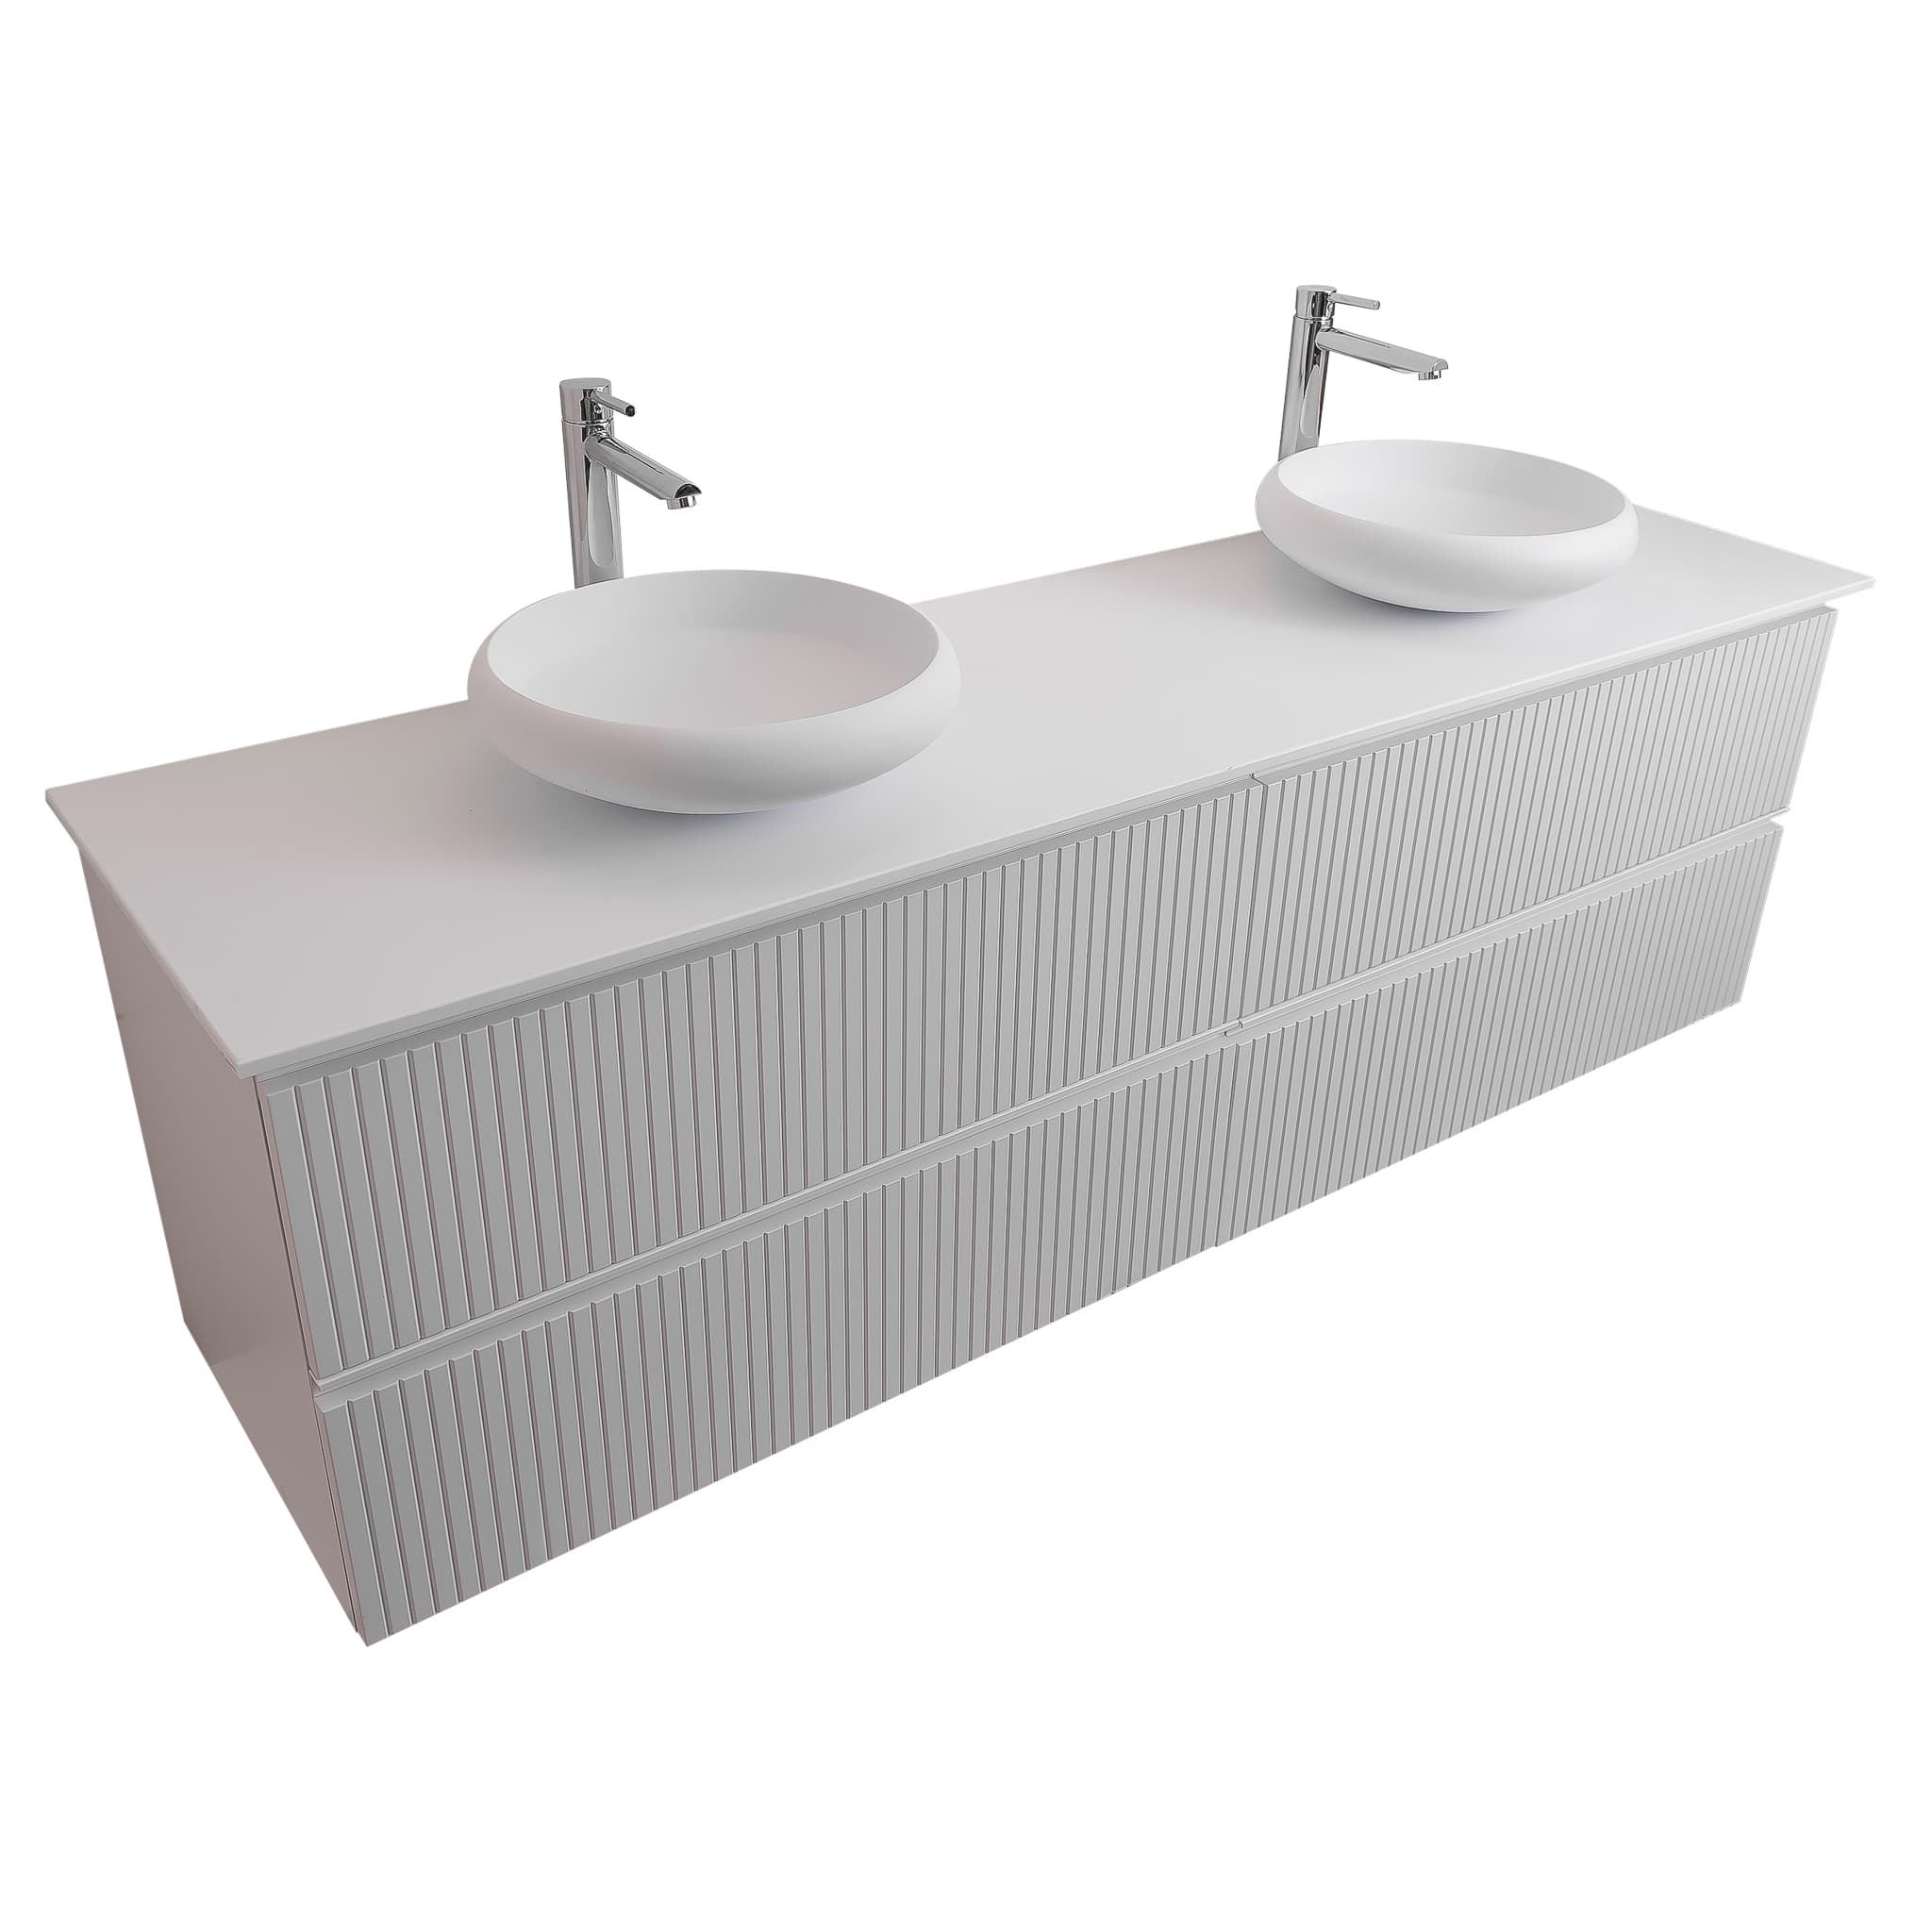 Ares 63 Matte White Cabinet, Solid Surface Flat White Counter And Two Round Solid Surface White Basin 1153, Wall Mounted Modern Vanity Set